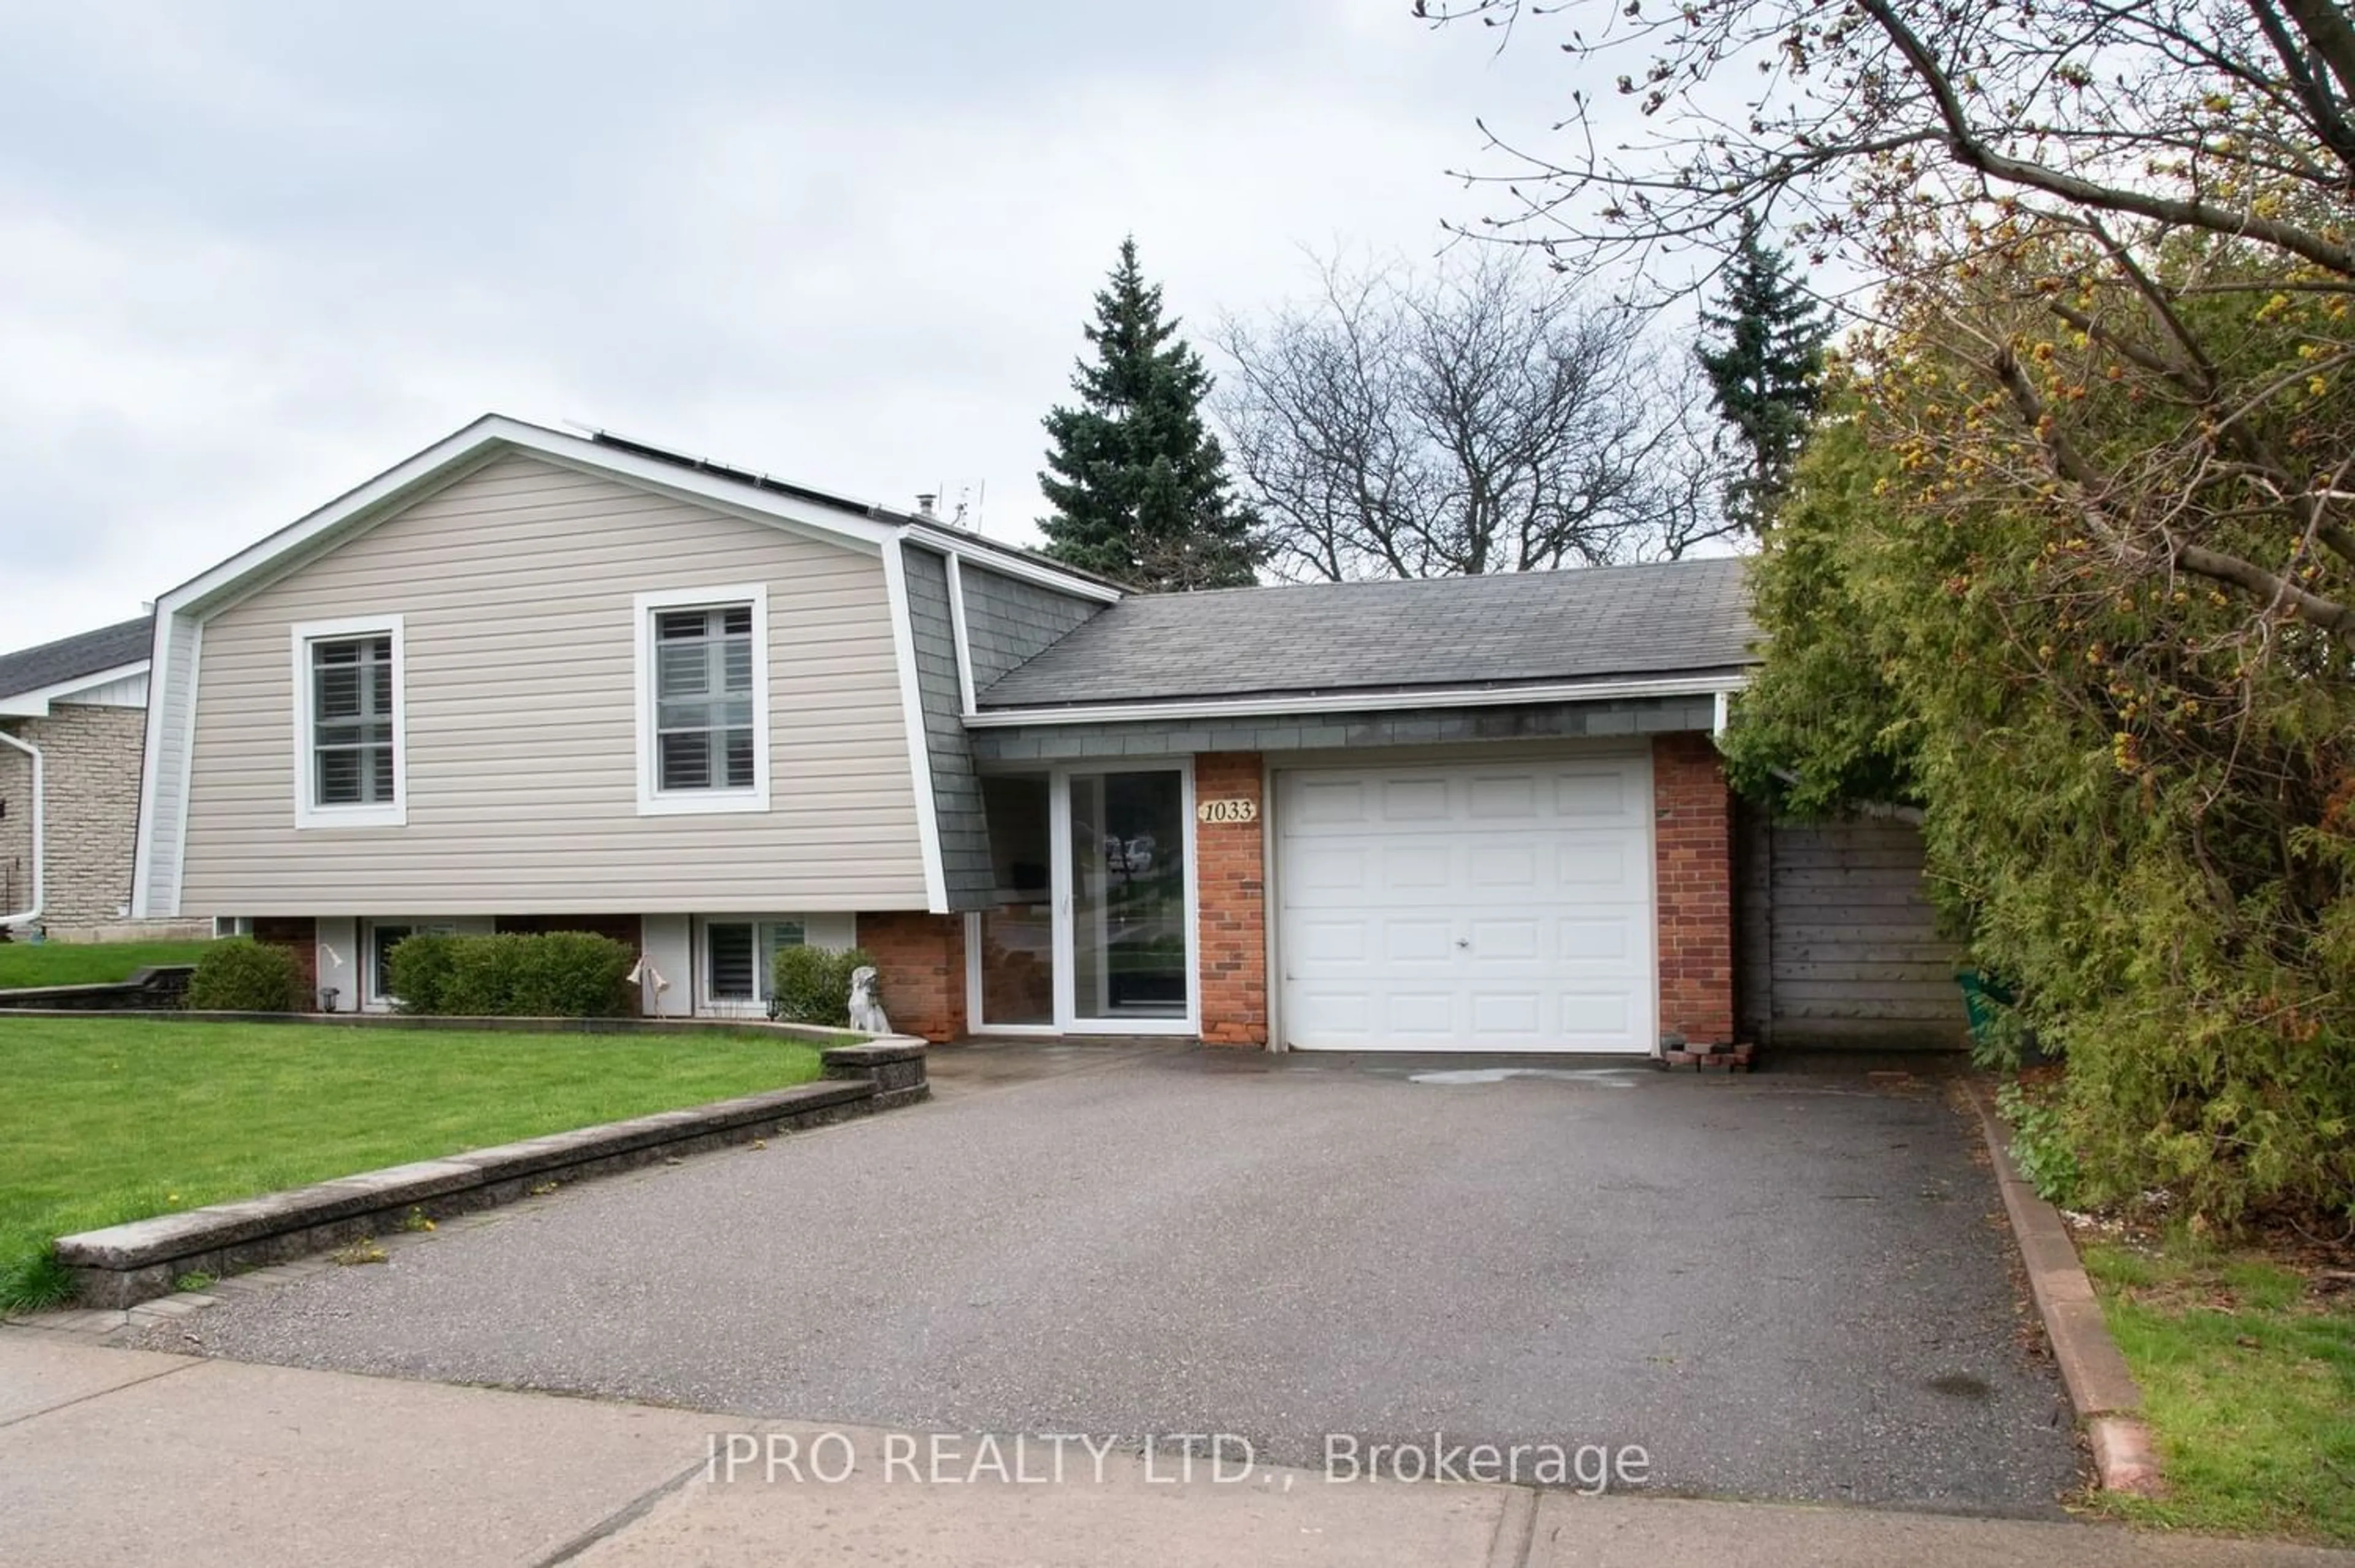 Frontside or backside of a home for 1033 Mississauga Valley Blvd, Mississauga Ontario L5A 2A1